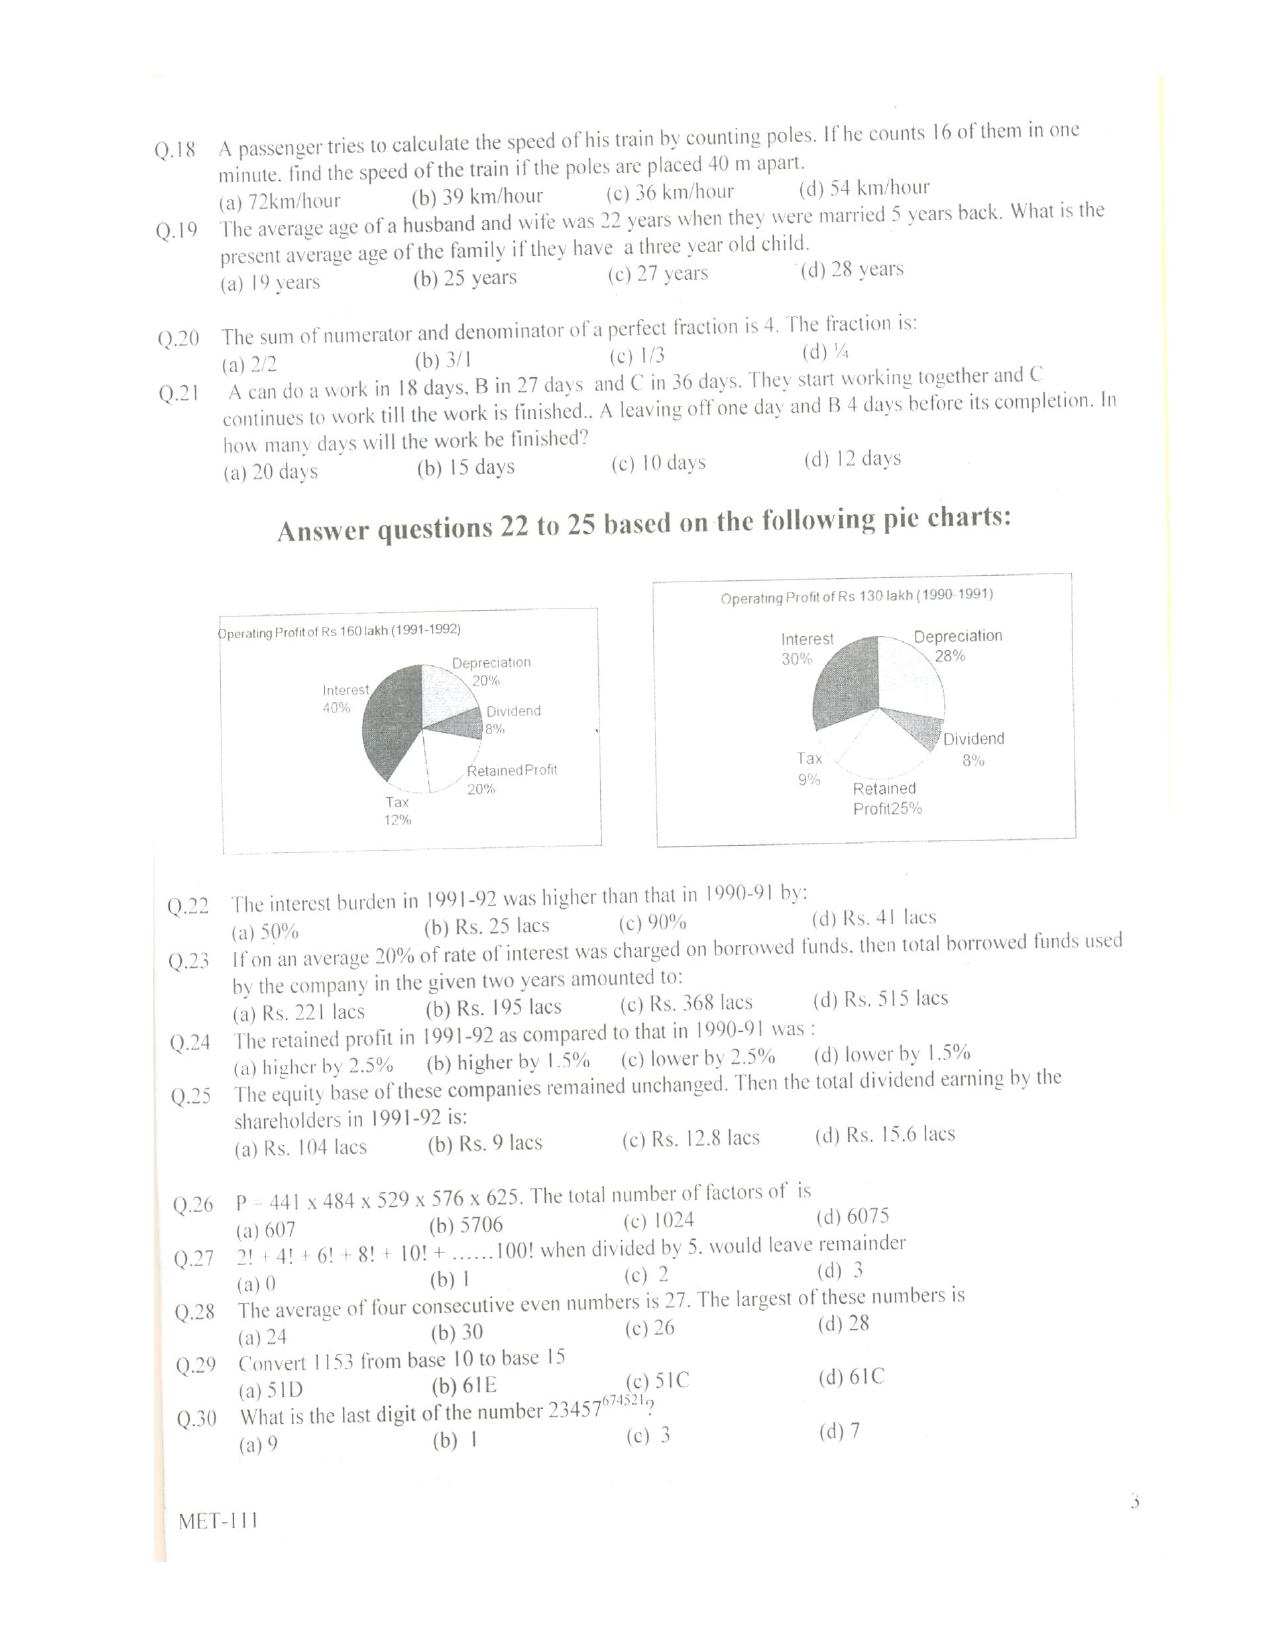 PU MET 2010 Question Booklet with Key - Page 3